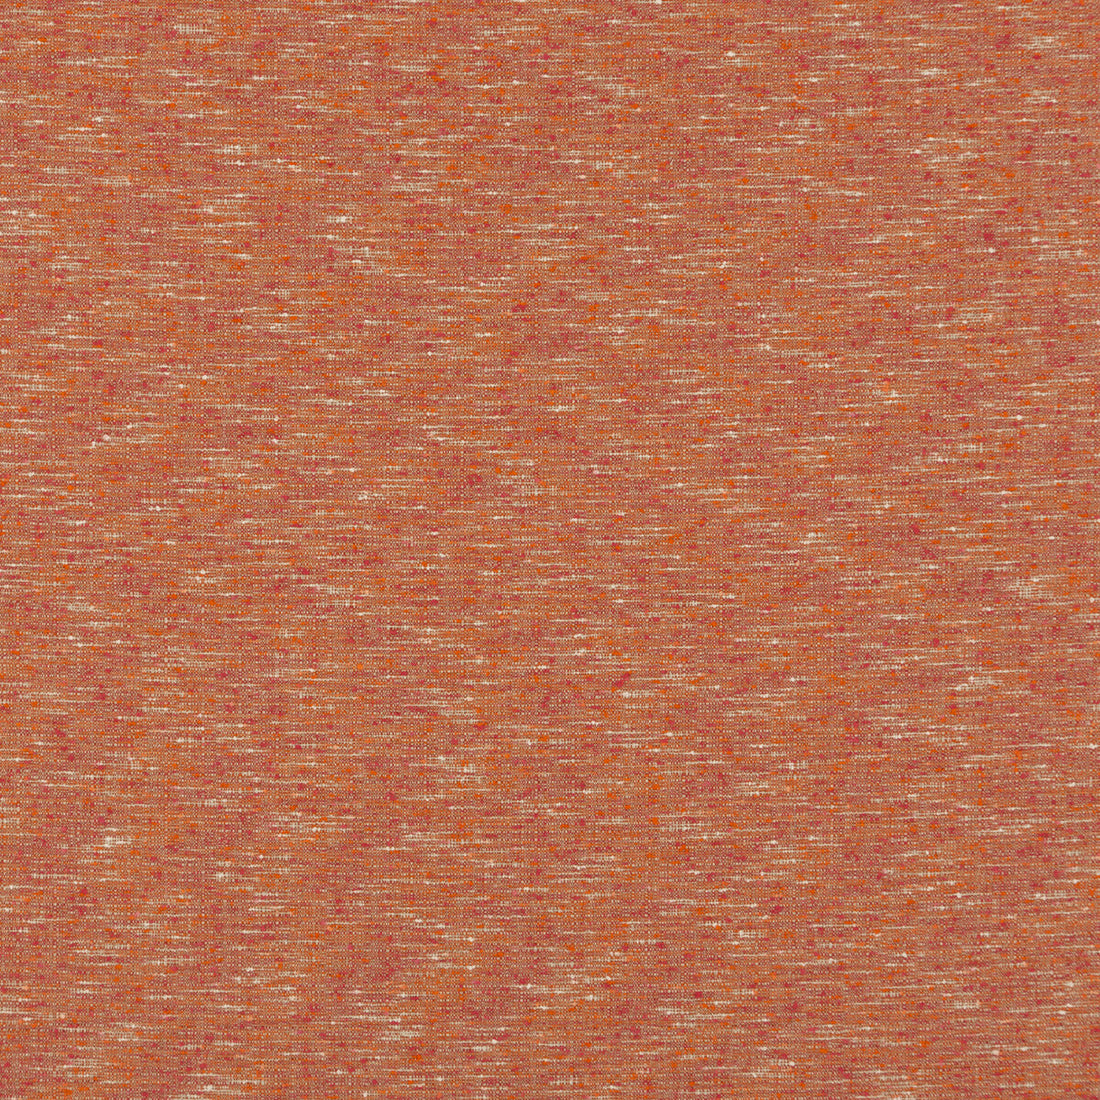 Drift fabric in spice color - pattern BF10678.330.0 - by G P &amp; J Baker in the Essential Colours collection